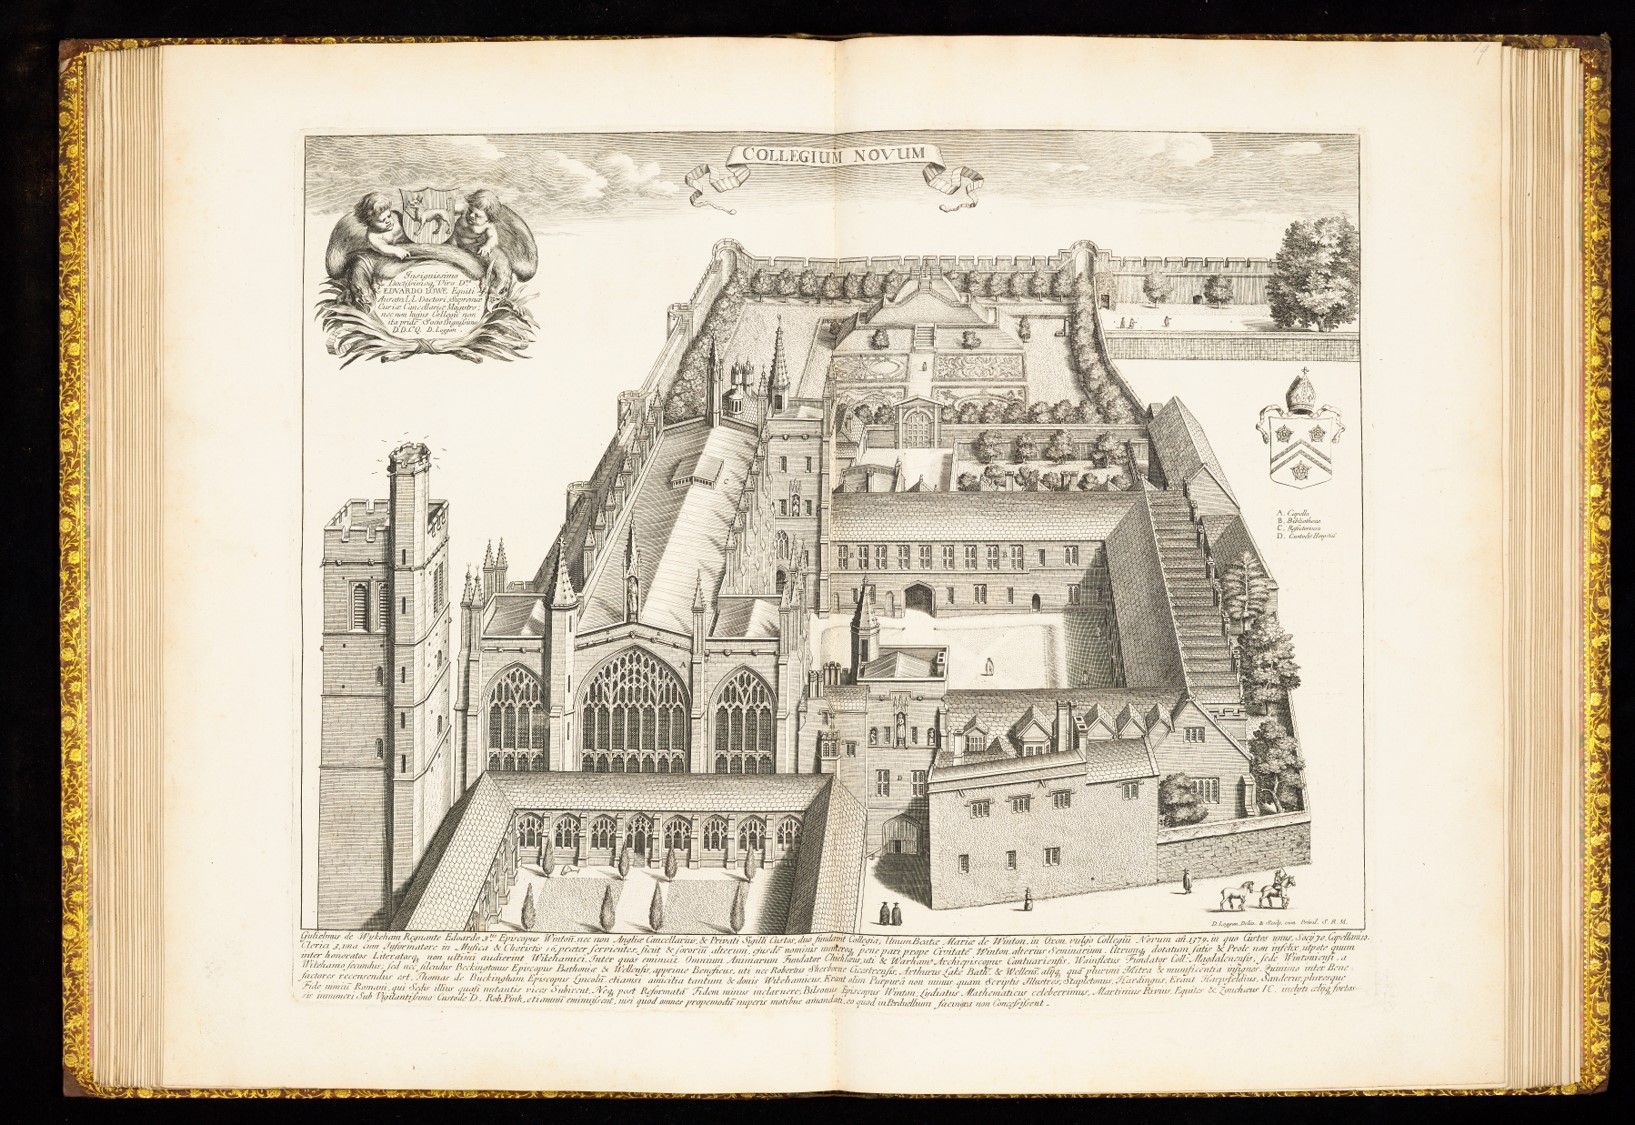 17th century illustration of New College buildings